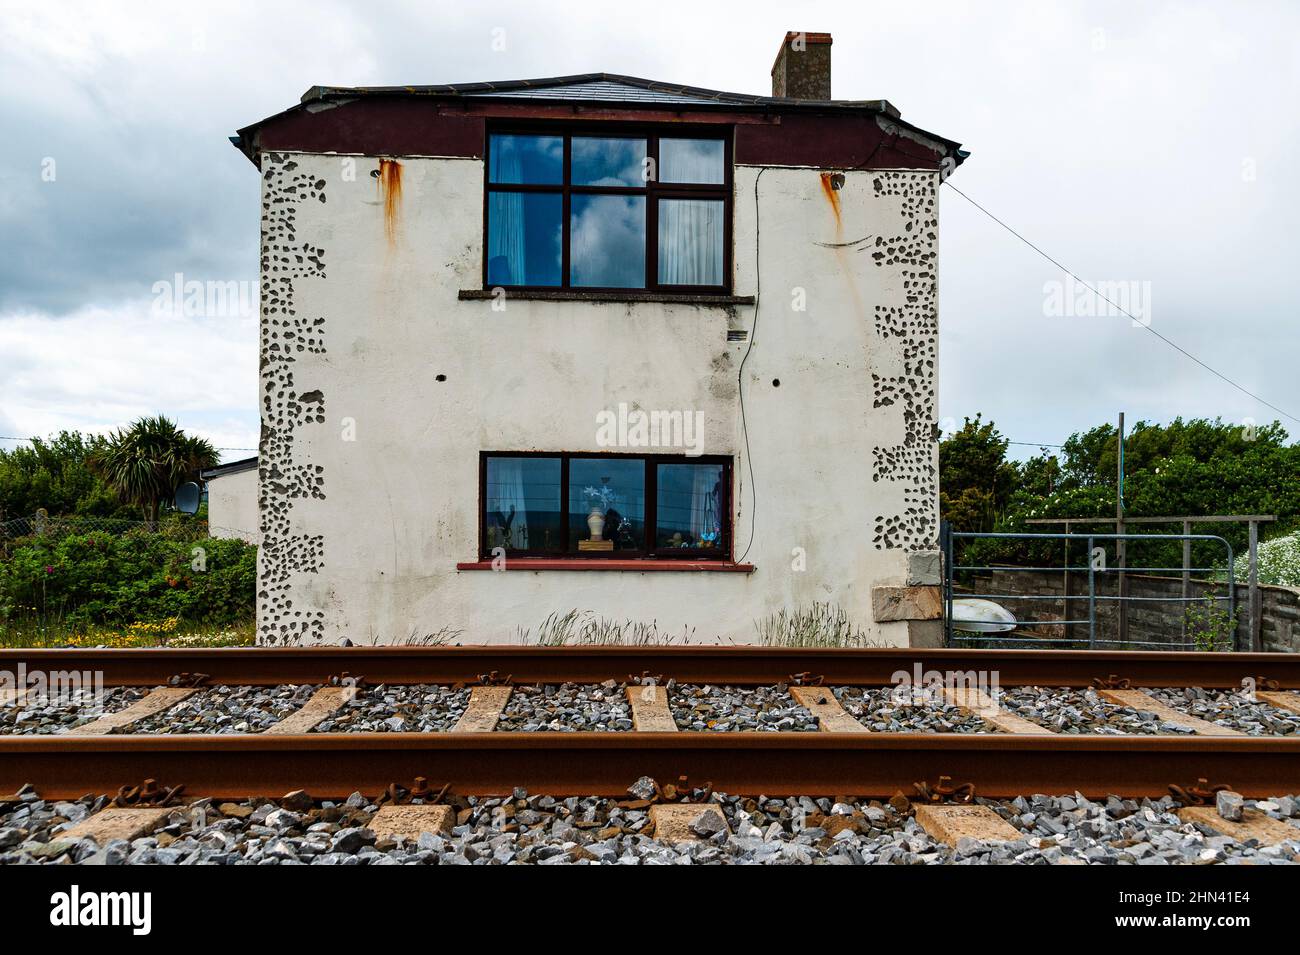 Derelict building close to railroad means sleepless nights. Dilapidated house by a railway or train tracks. Forsaken home conveys solitude concept Stock Photo